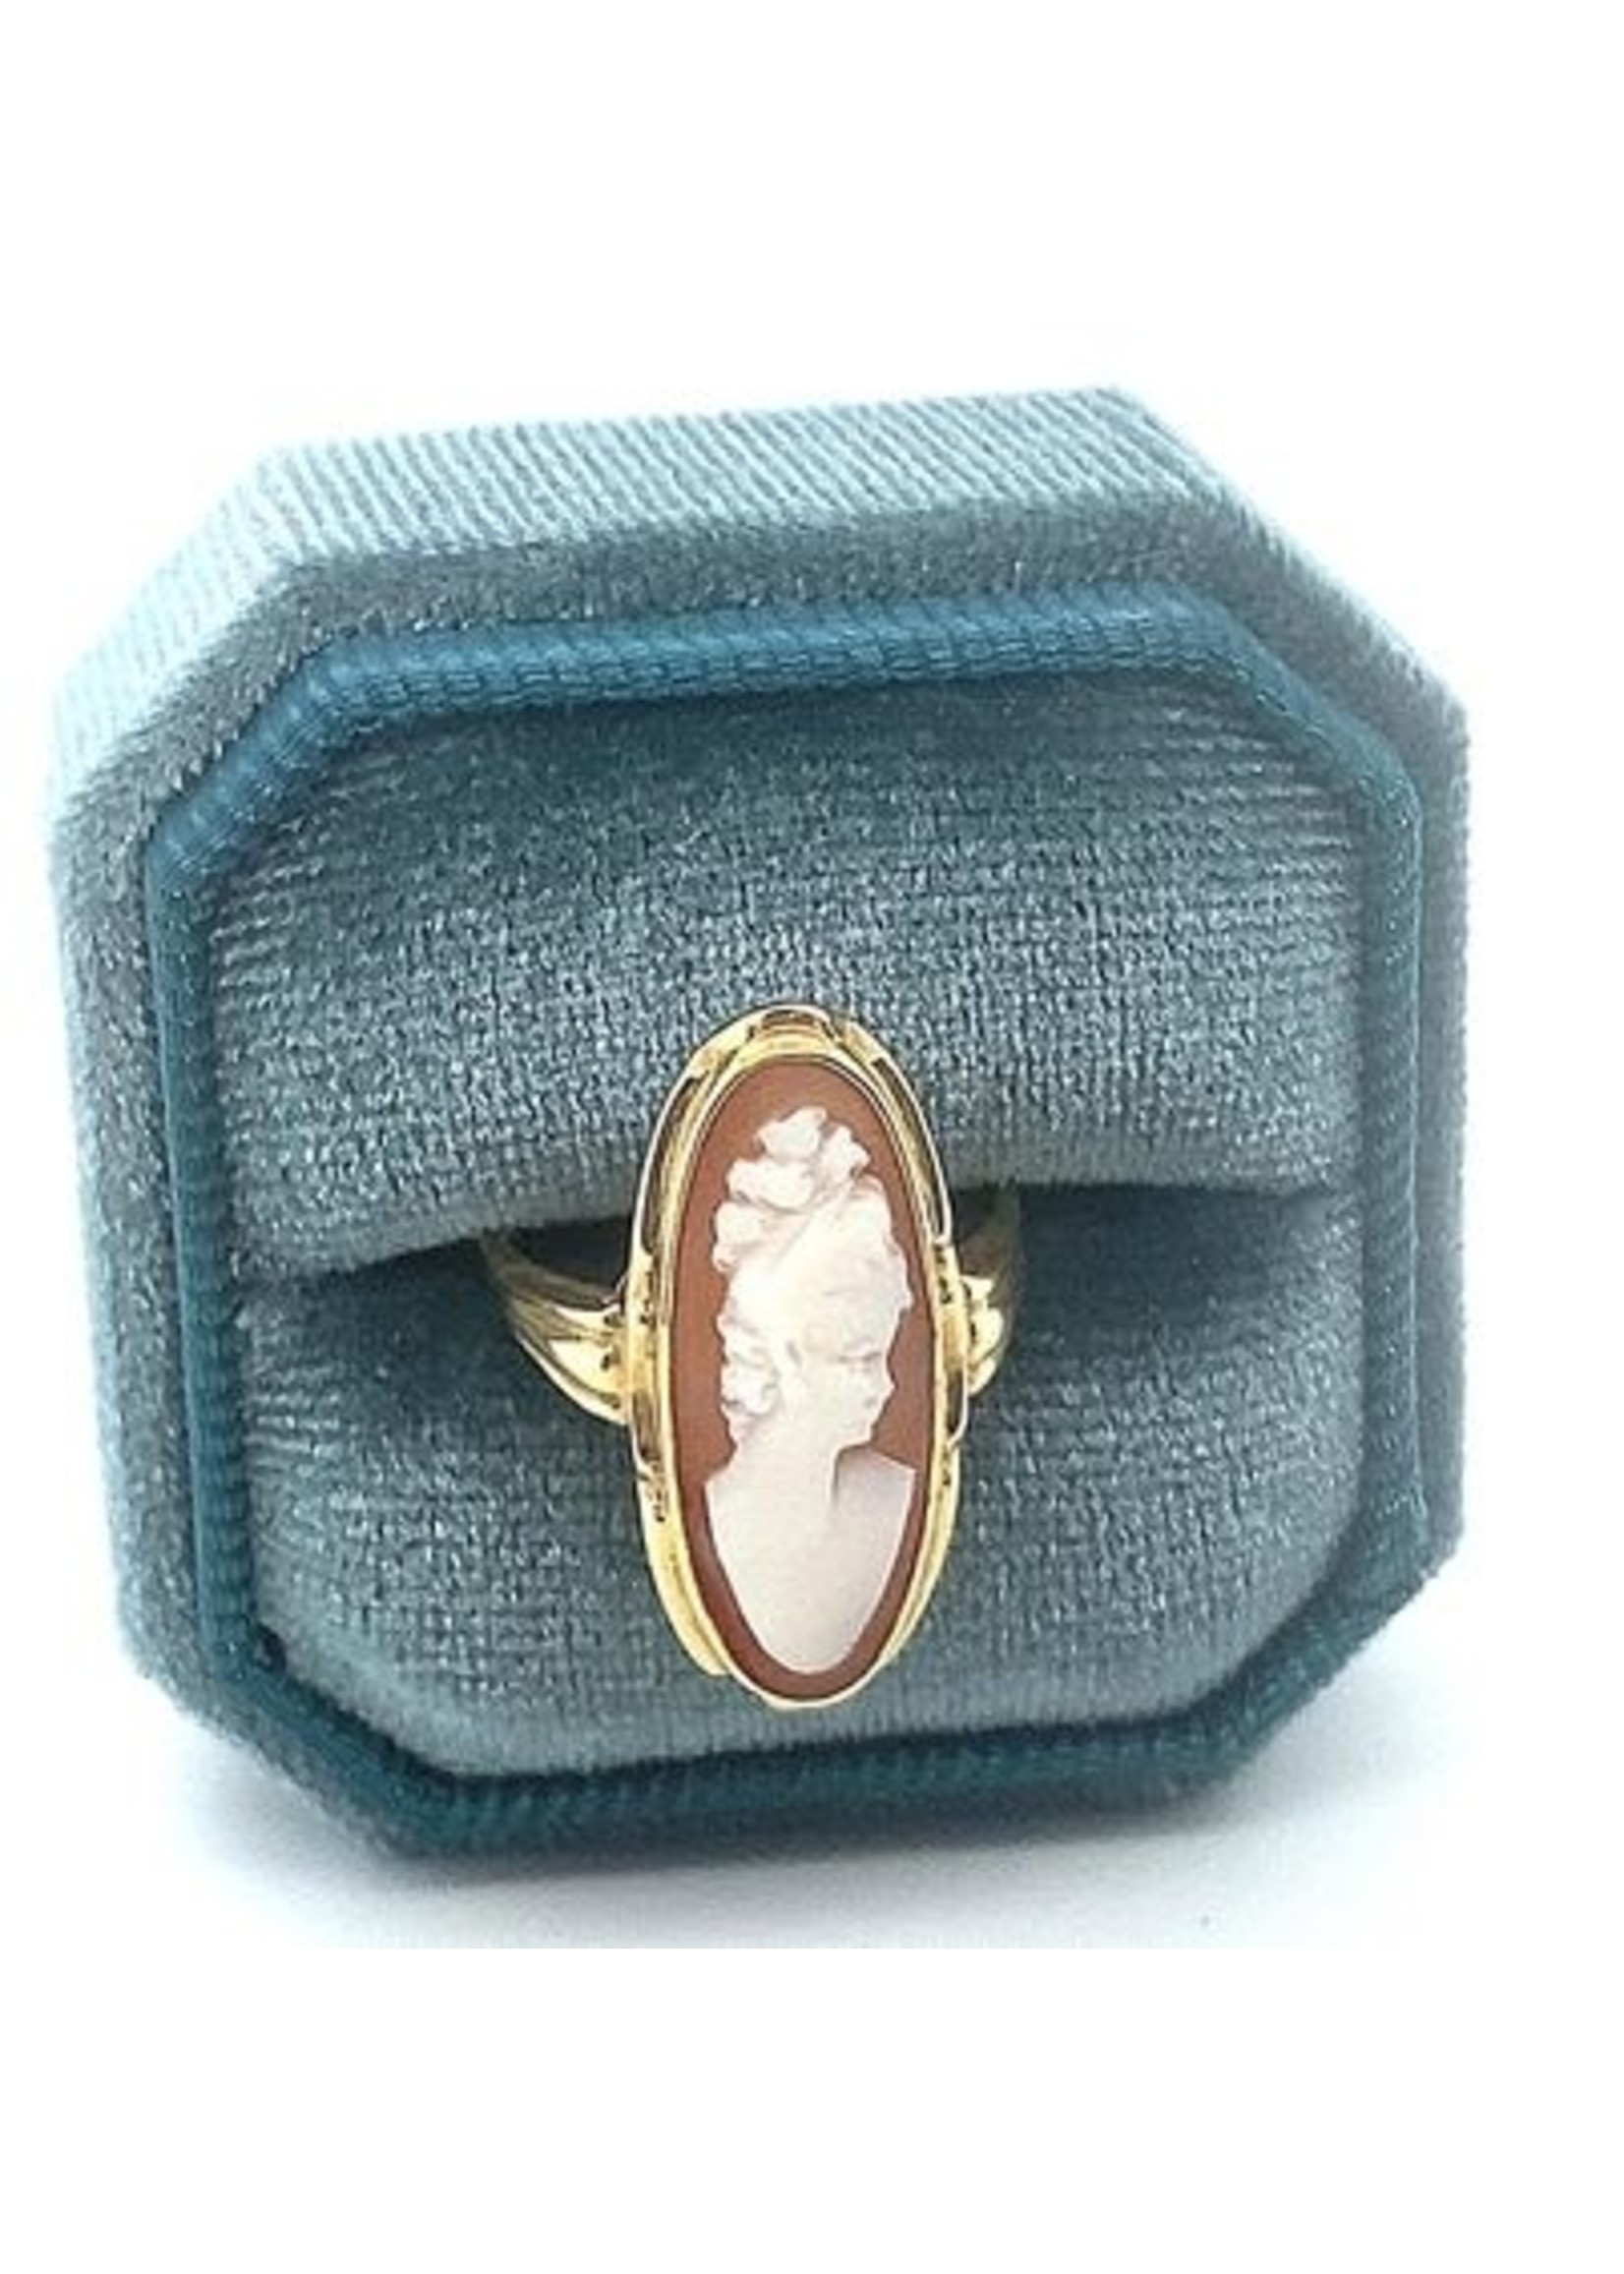 Vintage & Occasion Occasion gouden ring met camee